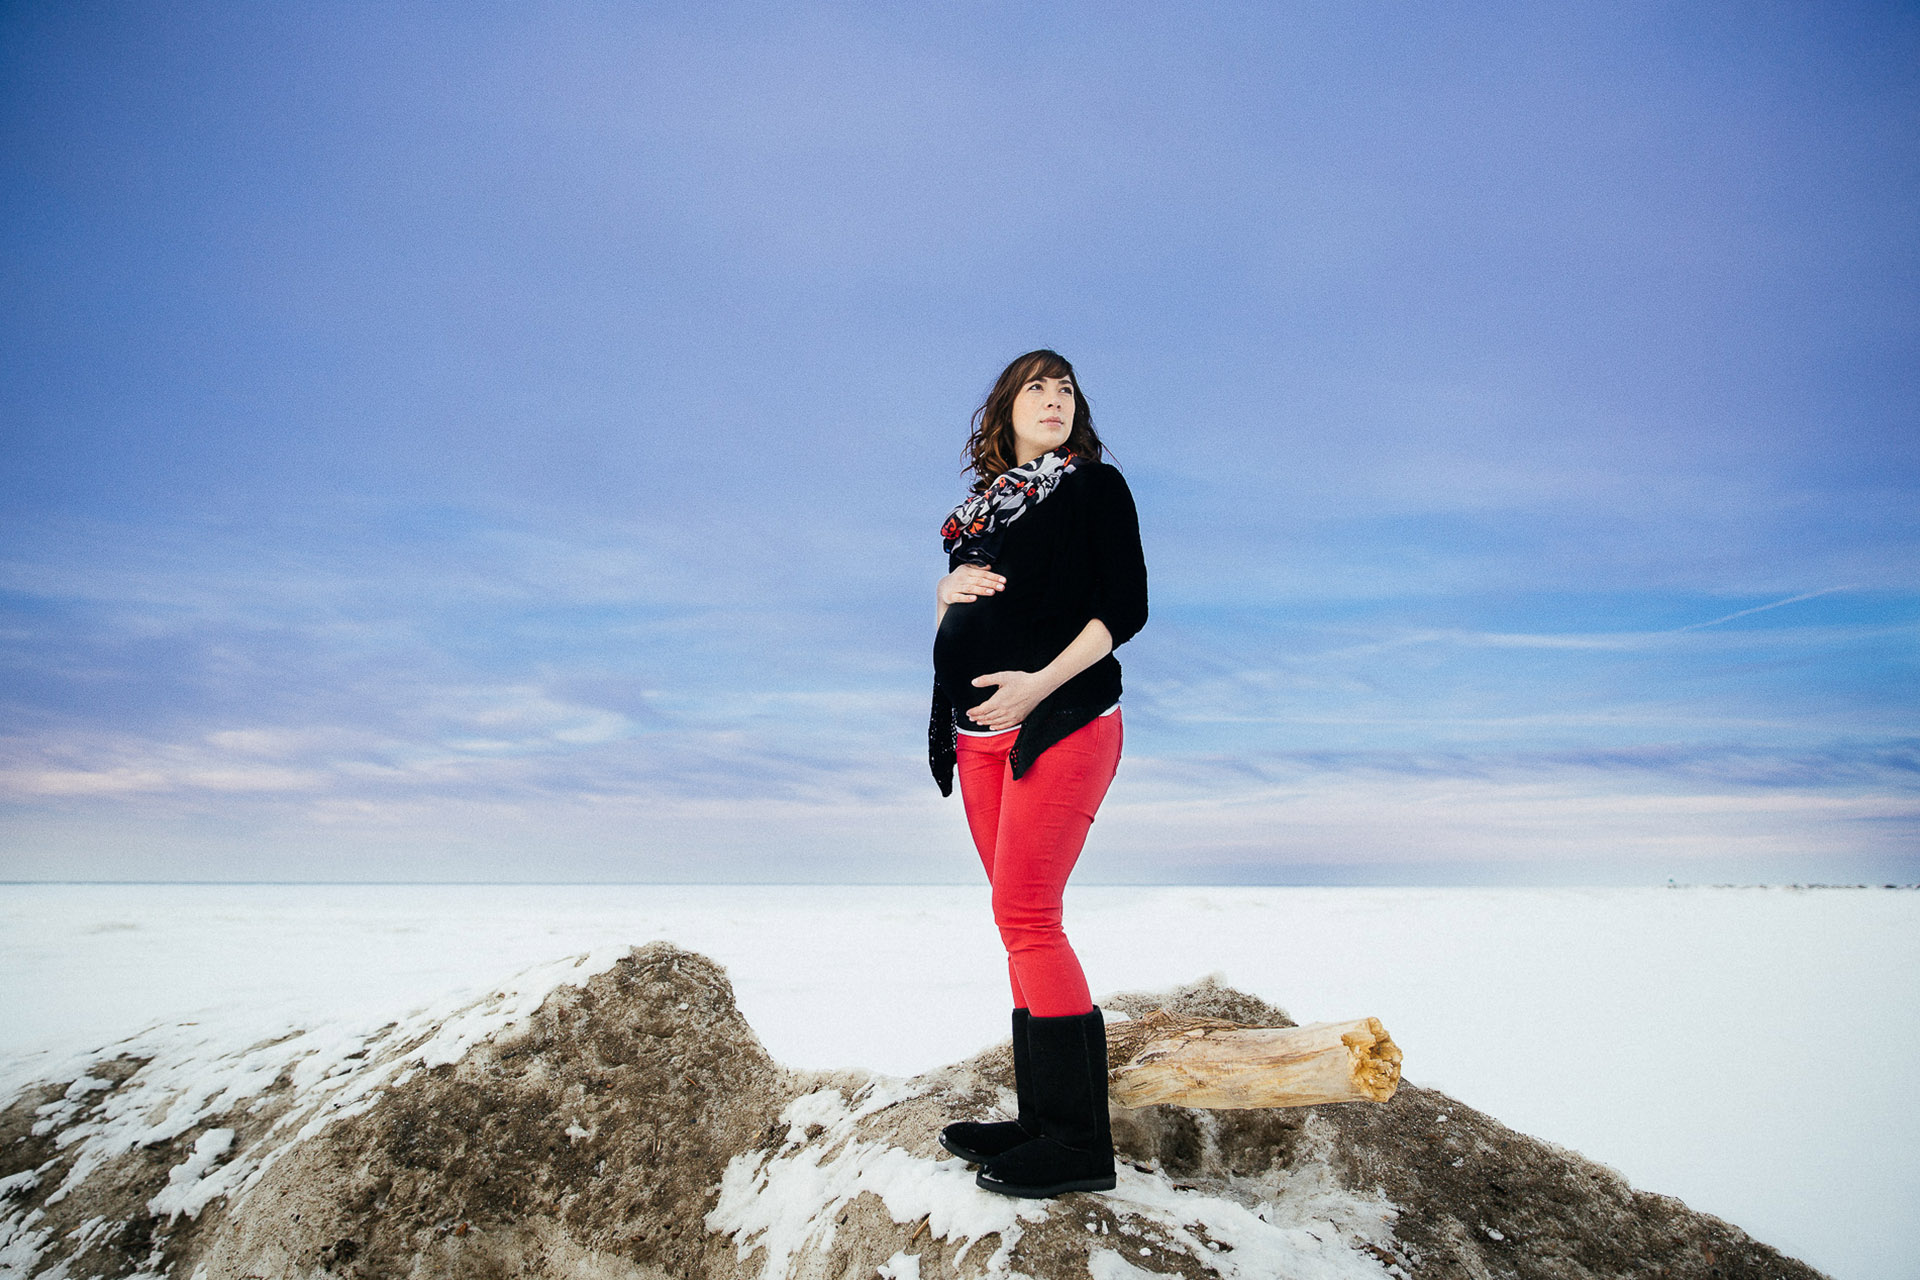 Angela Clunk Maternity Photos During Pregnancy - too much awesomeness photography - image 45.jpg